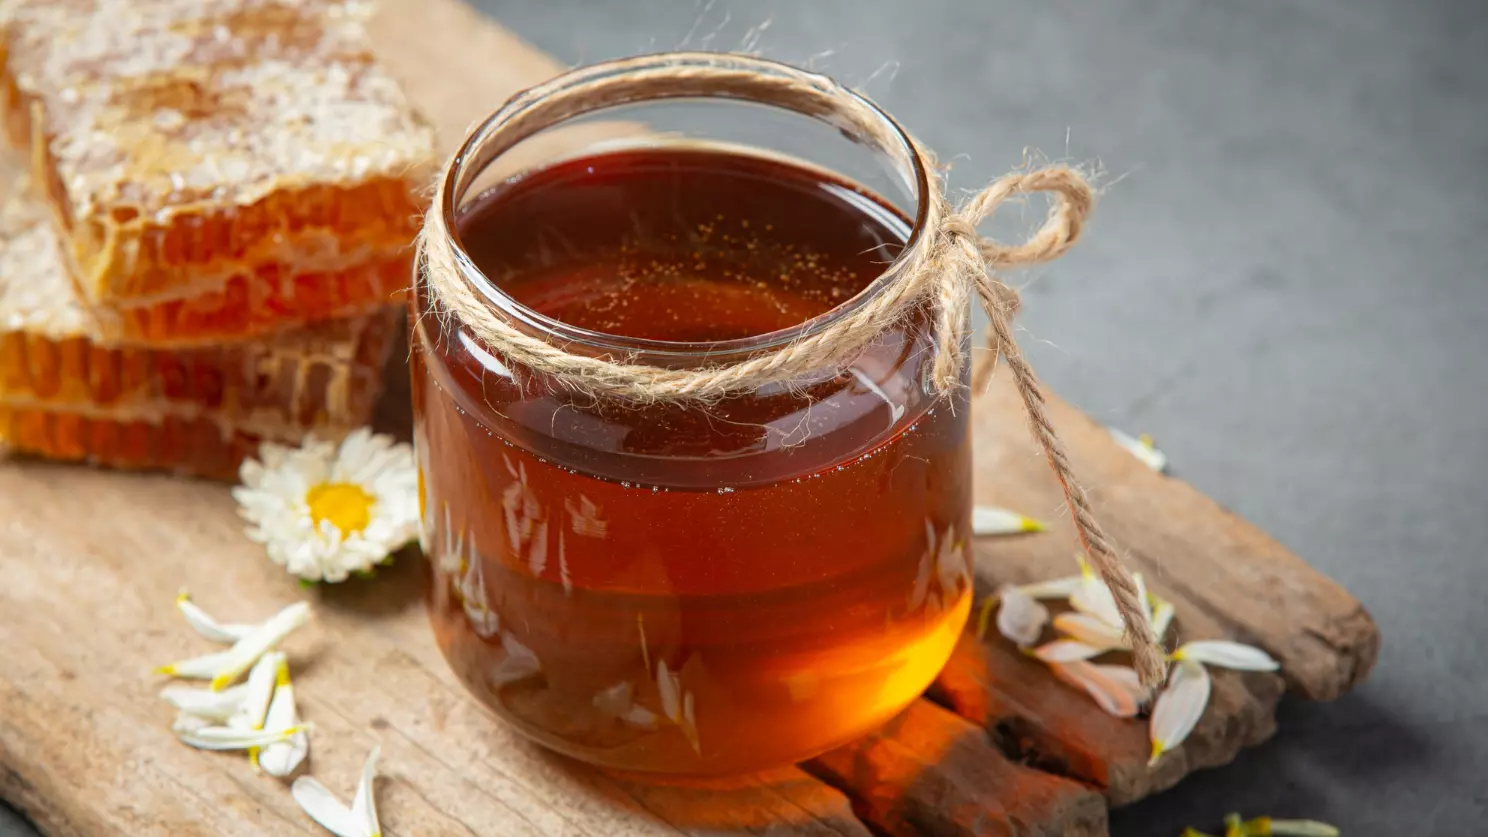 How many calories in honey?